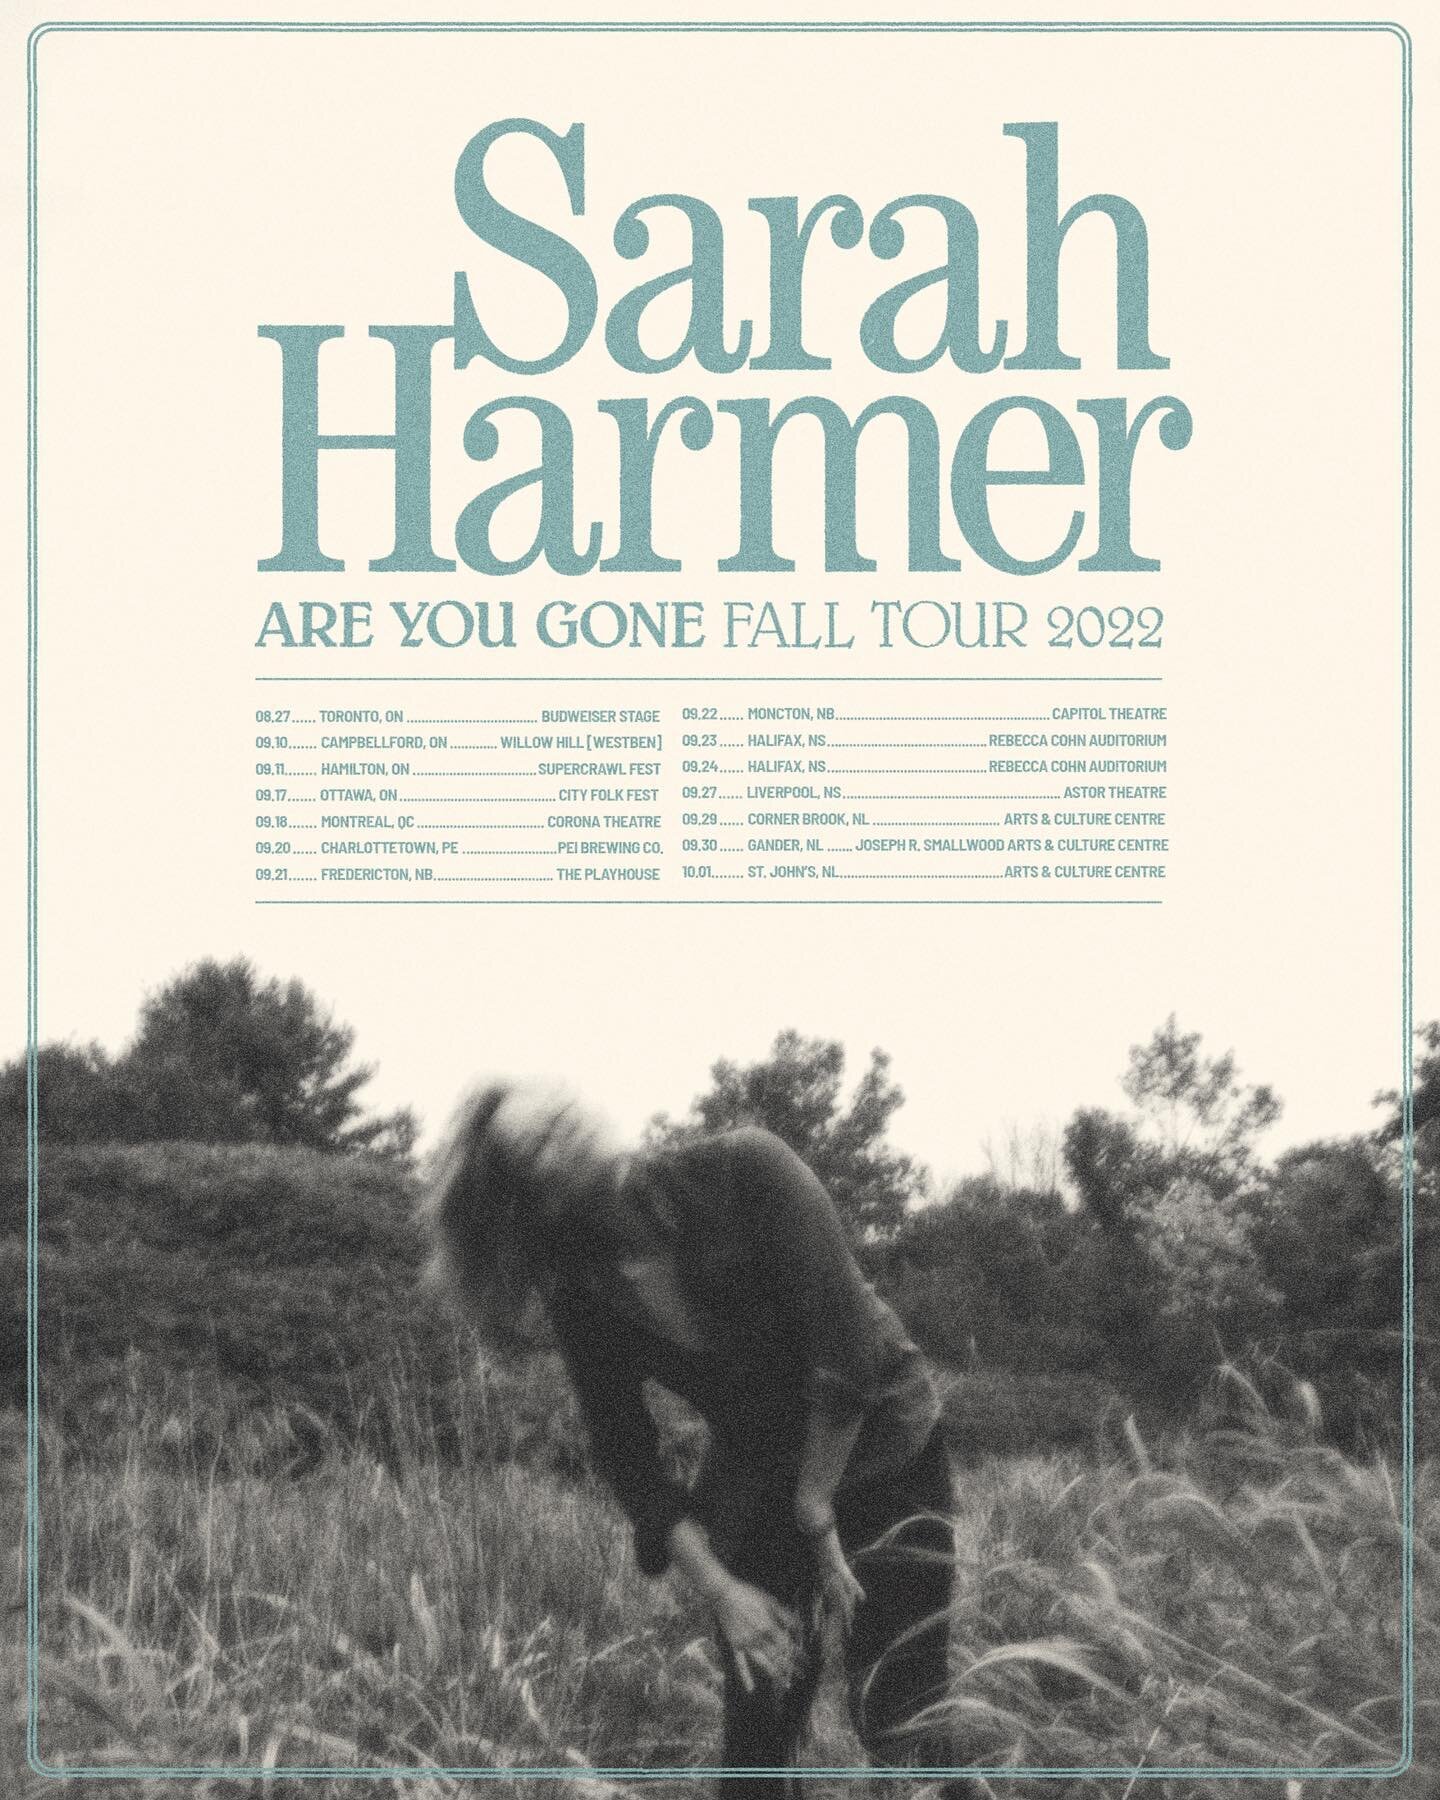 Don&rsquo;t miss Sarah Harmer on tour this Fall! Tickets &amp; info for all dates available via link in bio. 

📷: @vanessaheins 
Design: @thedankpit 

#sarahharmer #areyougonetour